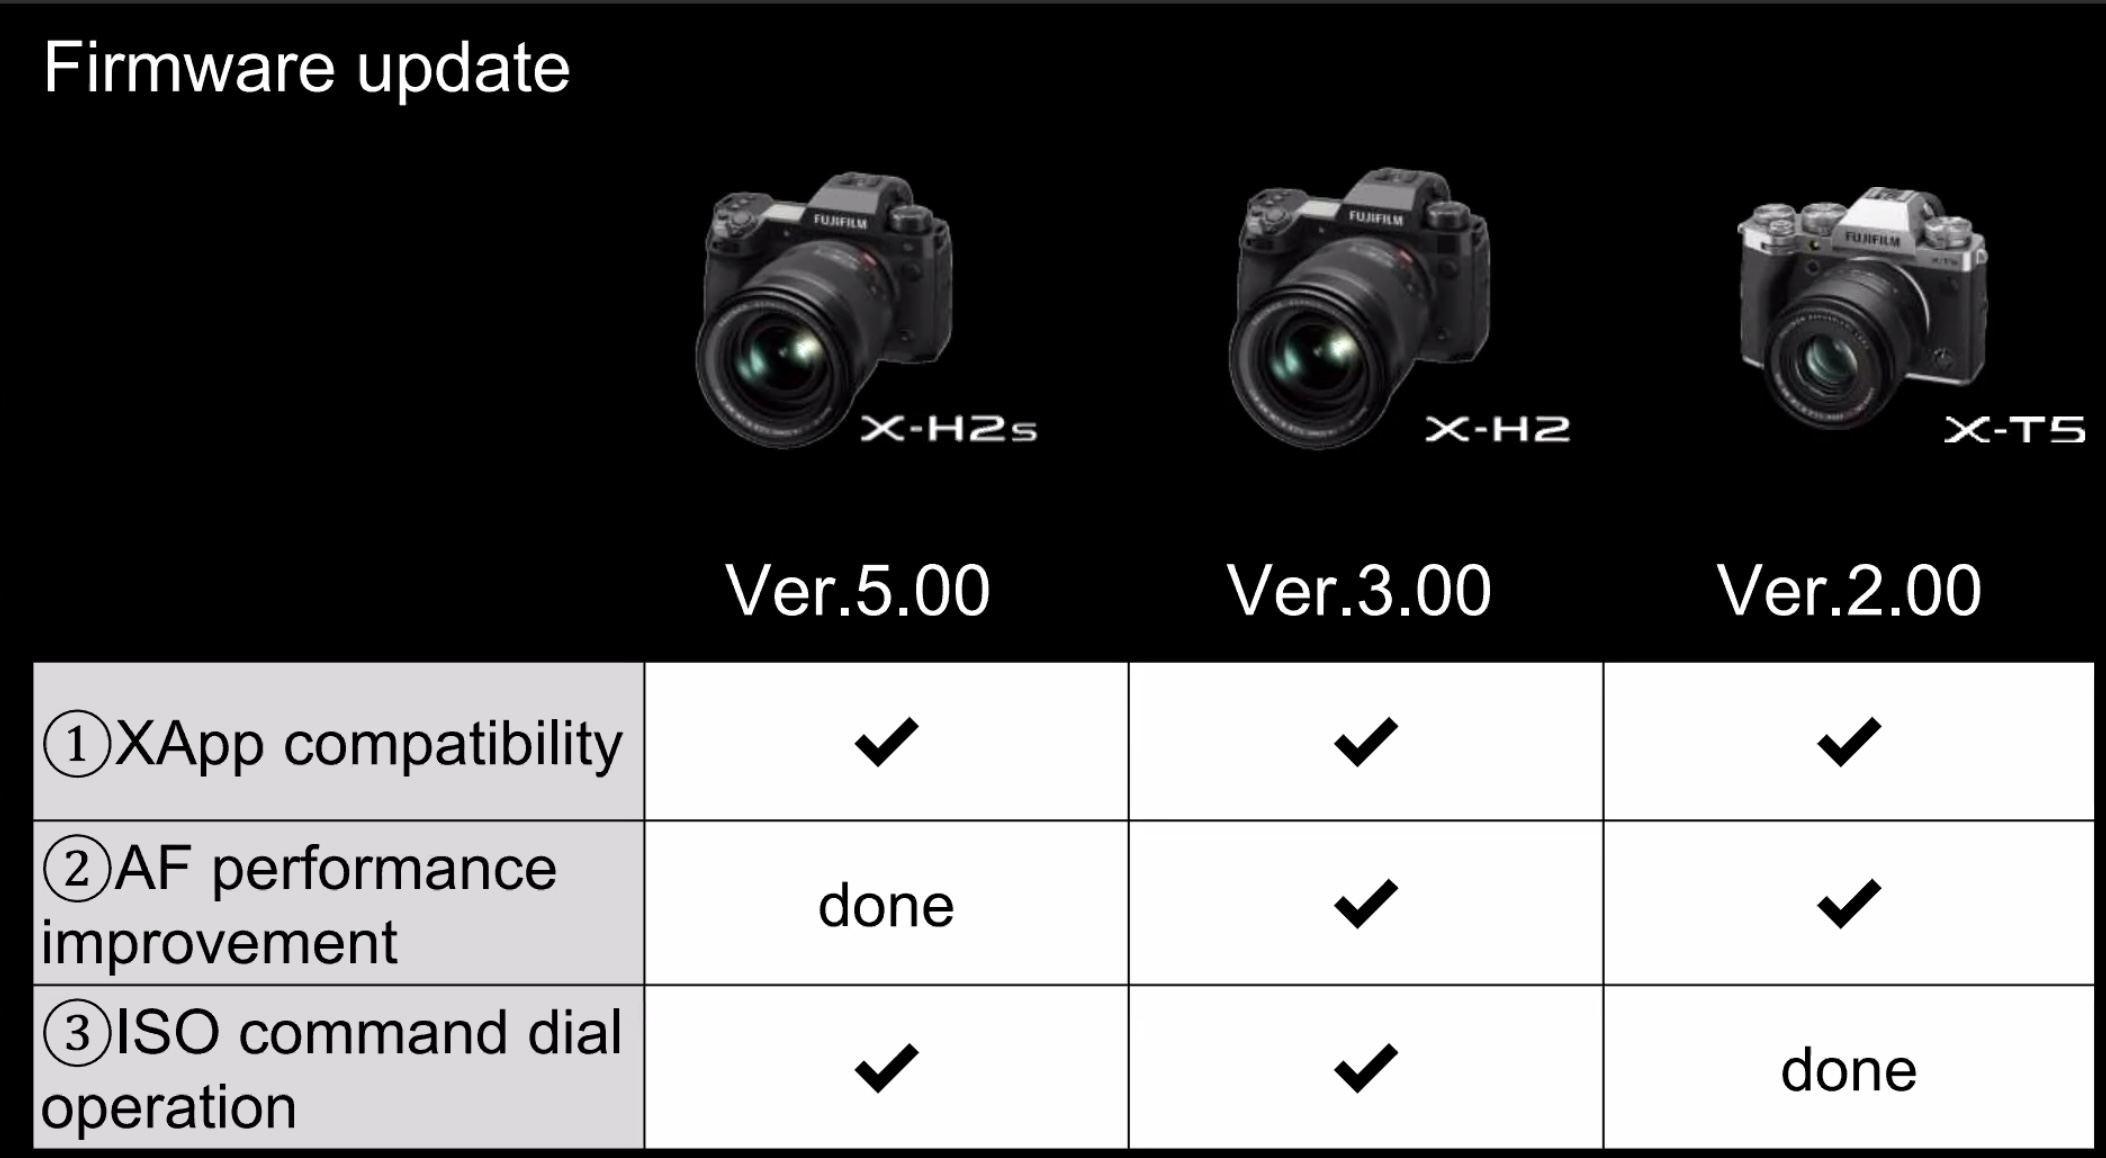 Fujifilm X-S20 is Coming (but When?) - Some Clarifications and Speculations  - Fuji Rumors